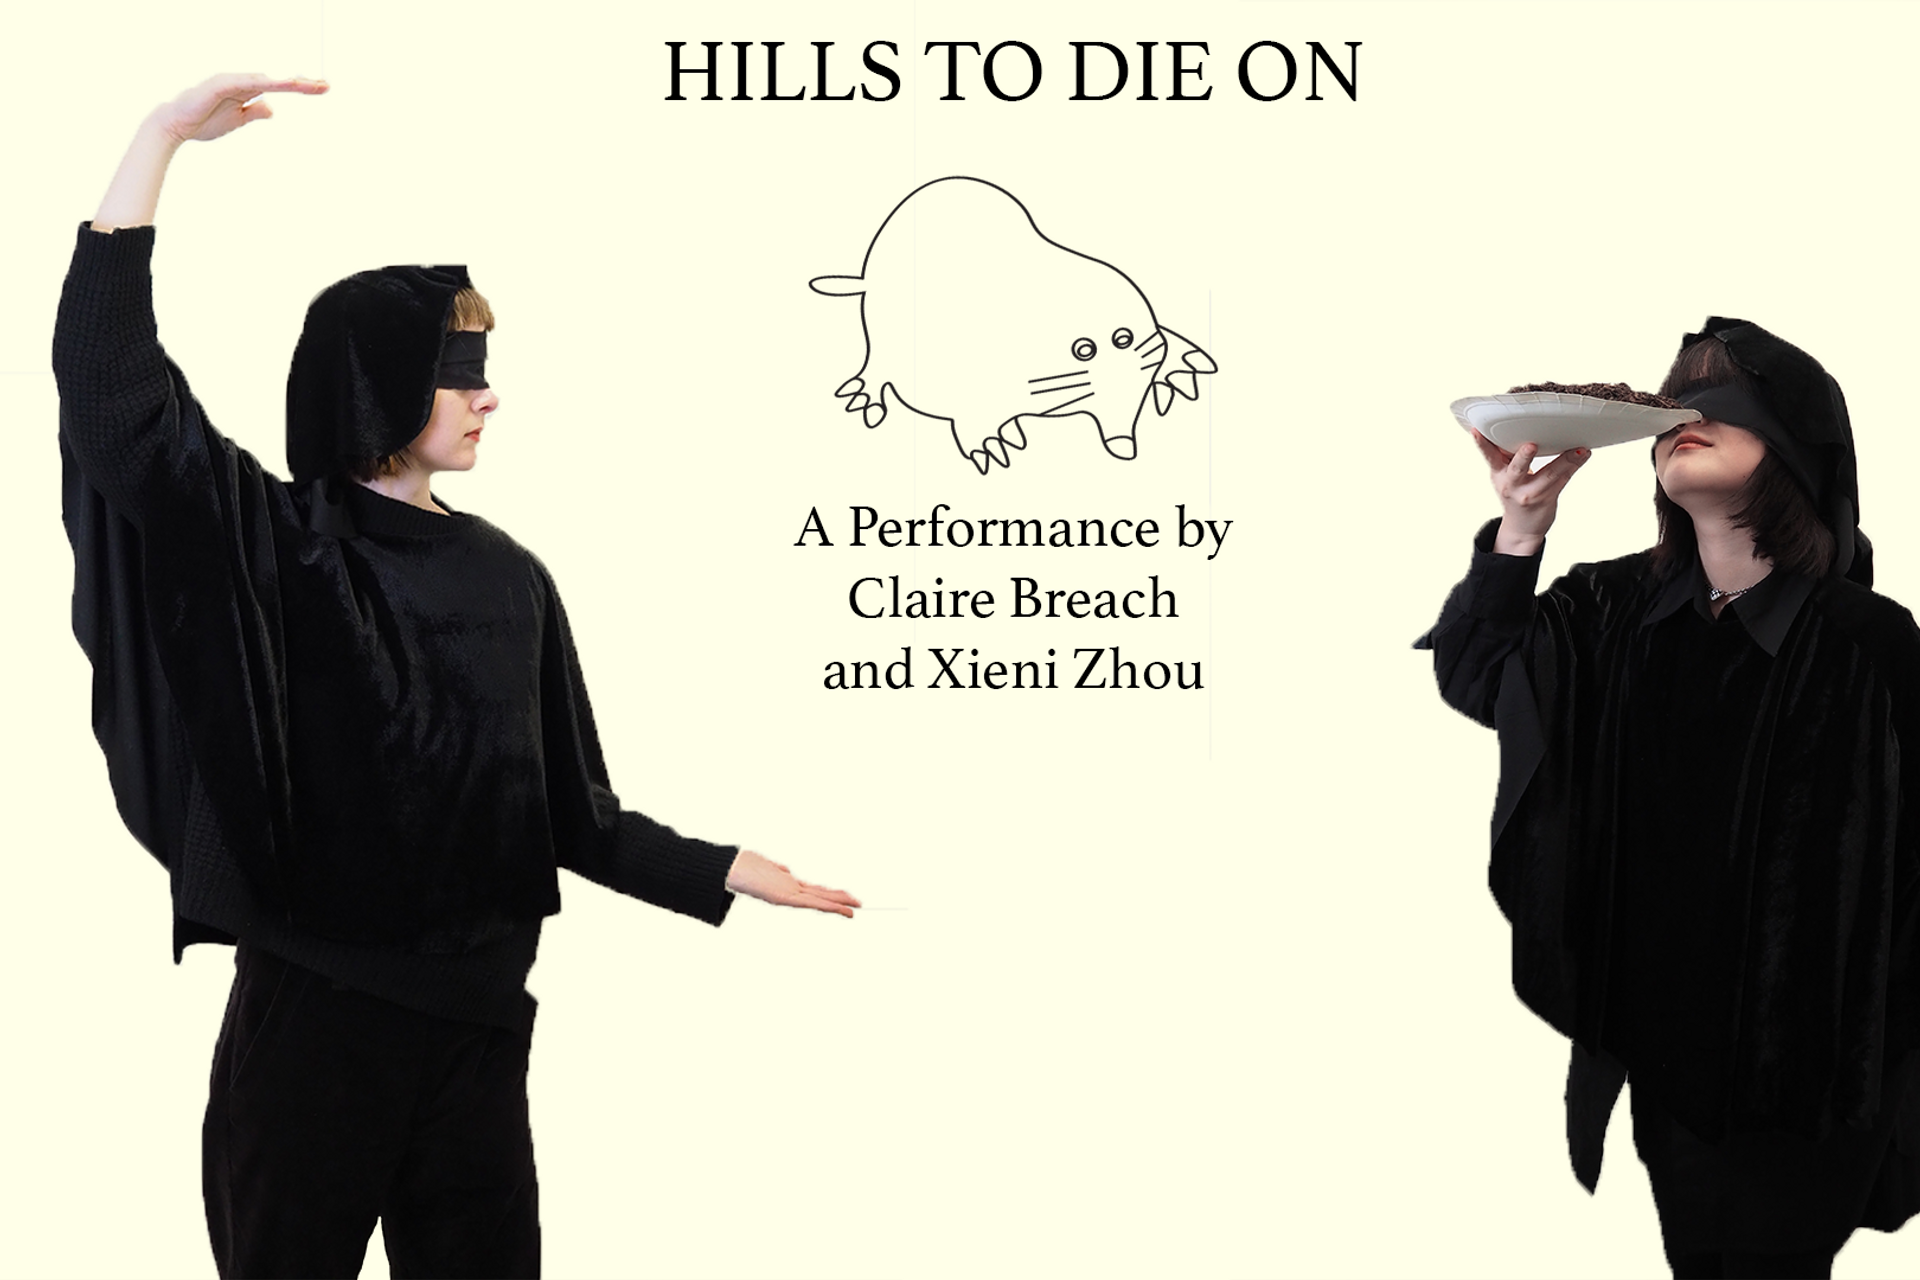 Visual Communication: Hills to Die On image